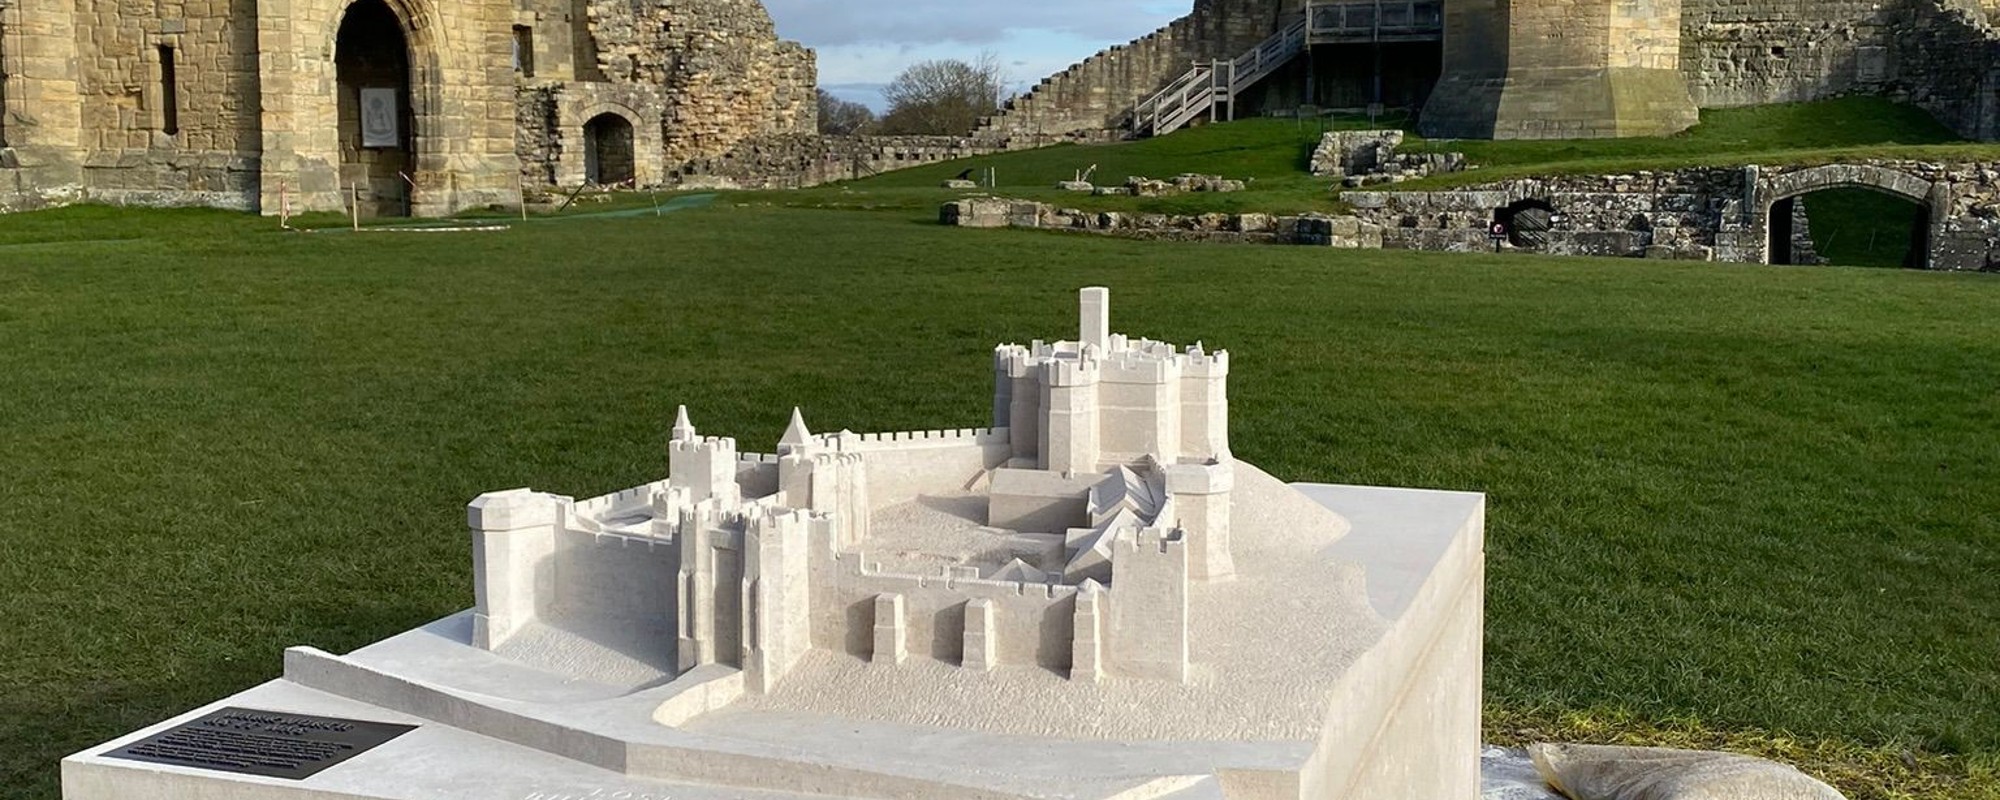 New Case Study Uploaded For the Contract Lift at Warkworth Castle